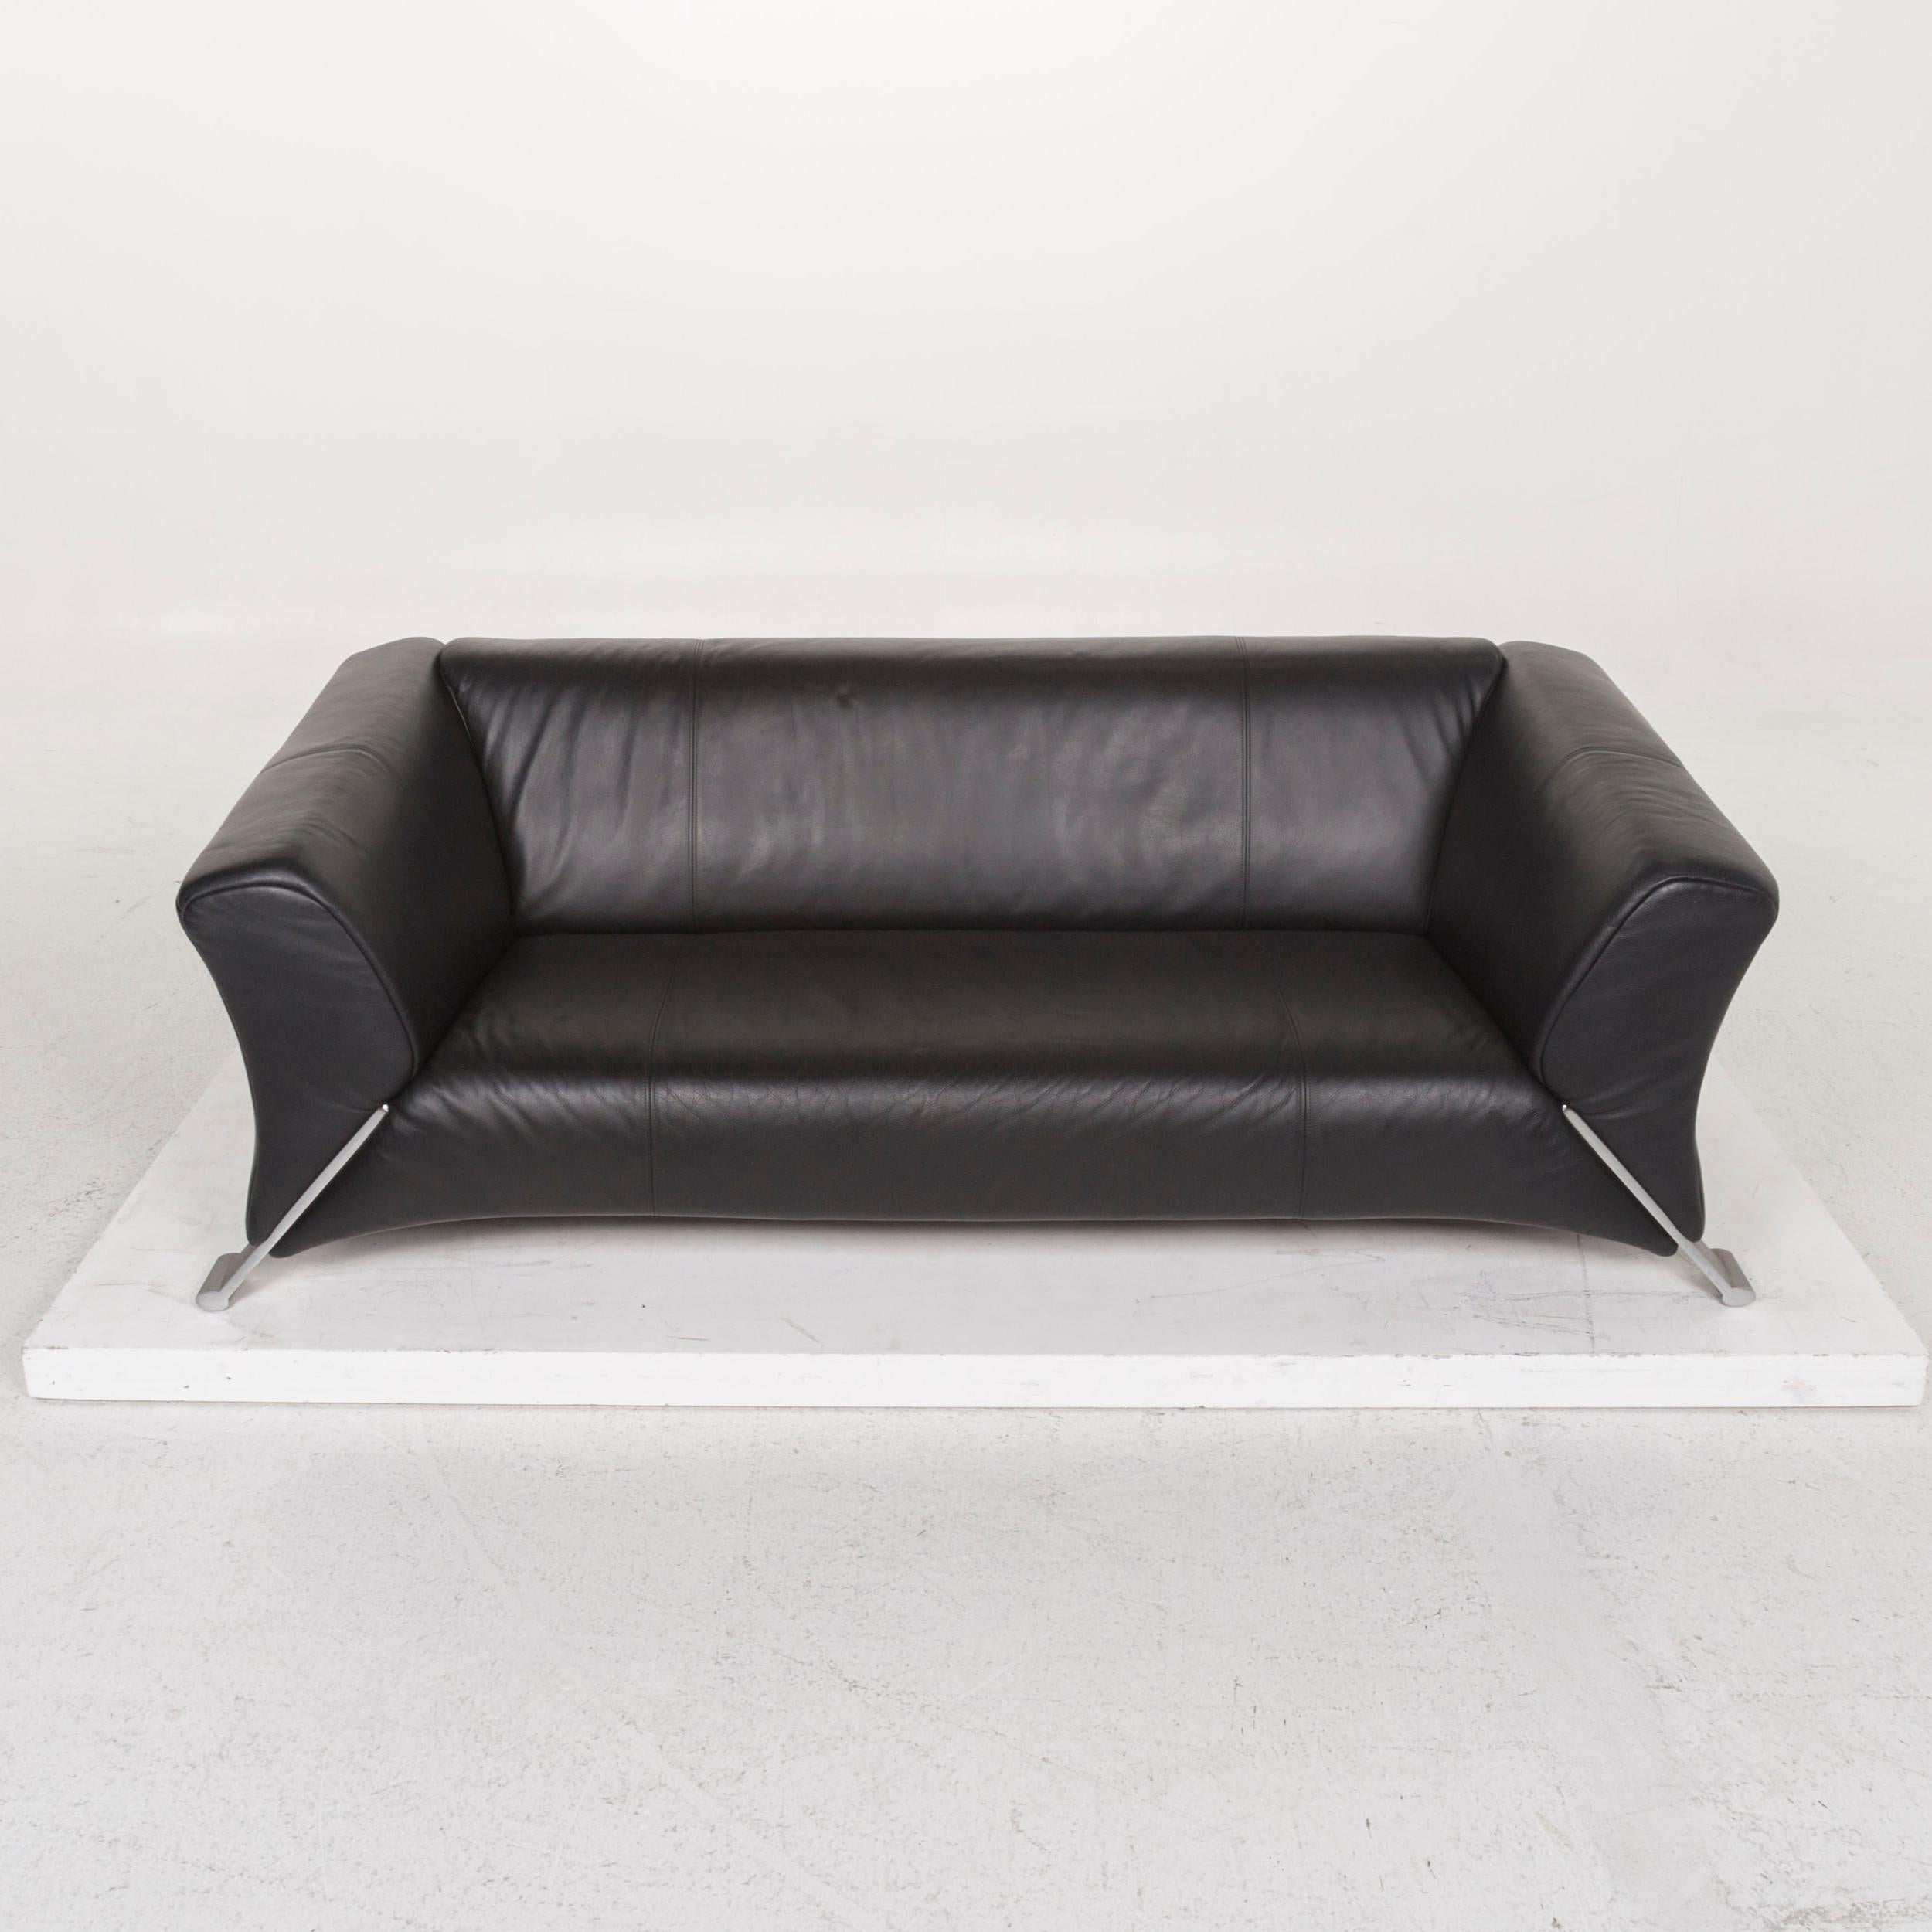 Rolf Benz 322 Leather Sofa Black Three-Seat For Sale 2